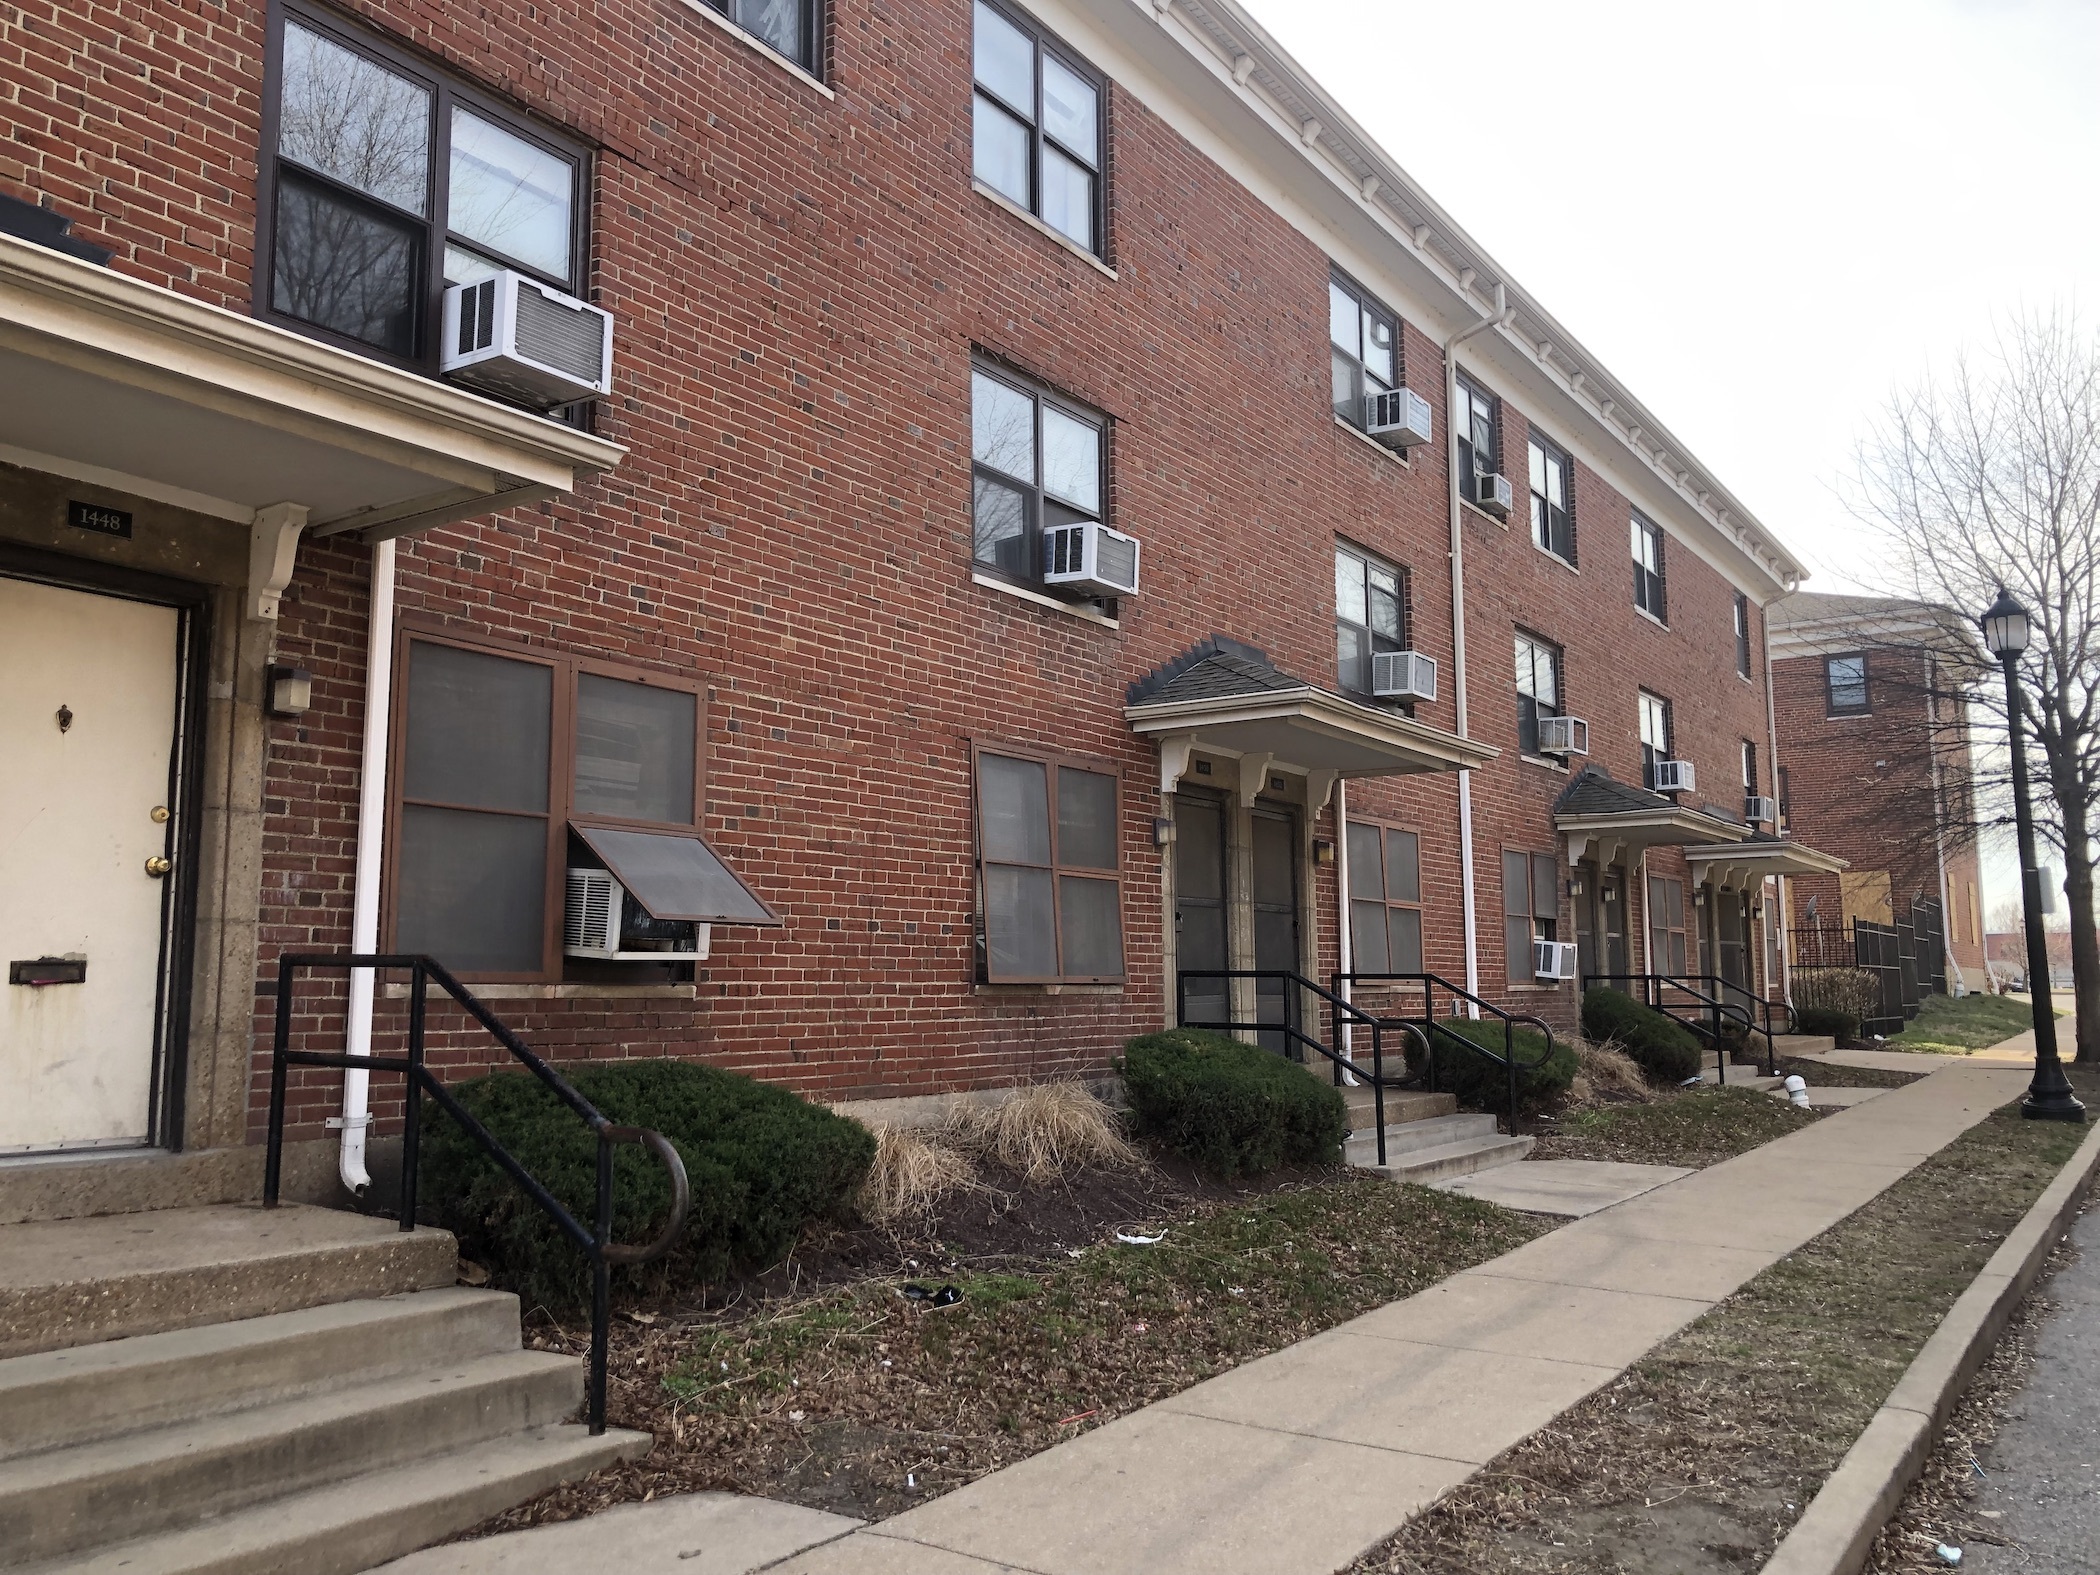 A Boston firm has been selected to redevelop the Clinton-Peabody Apartments, the oldest public housing site in St. Louis. (Preservation of Affordable Housing Inc.)